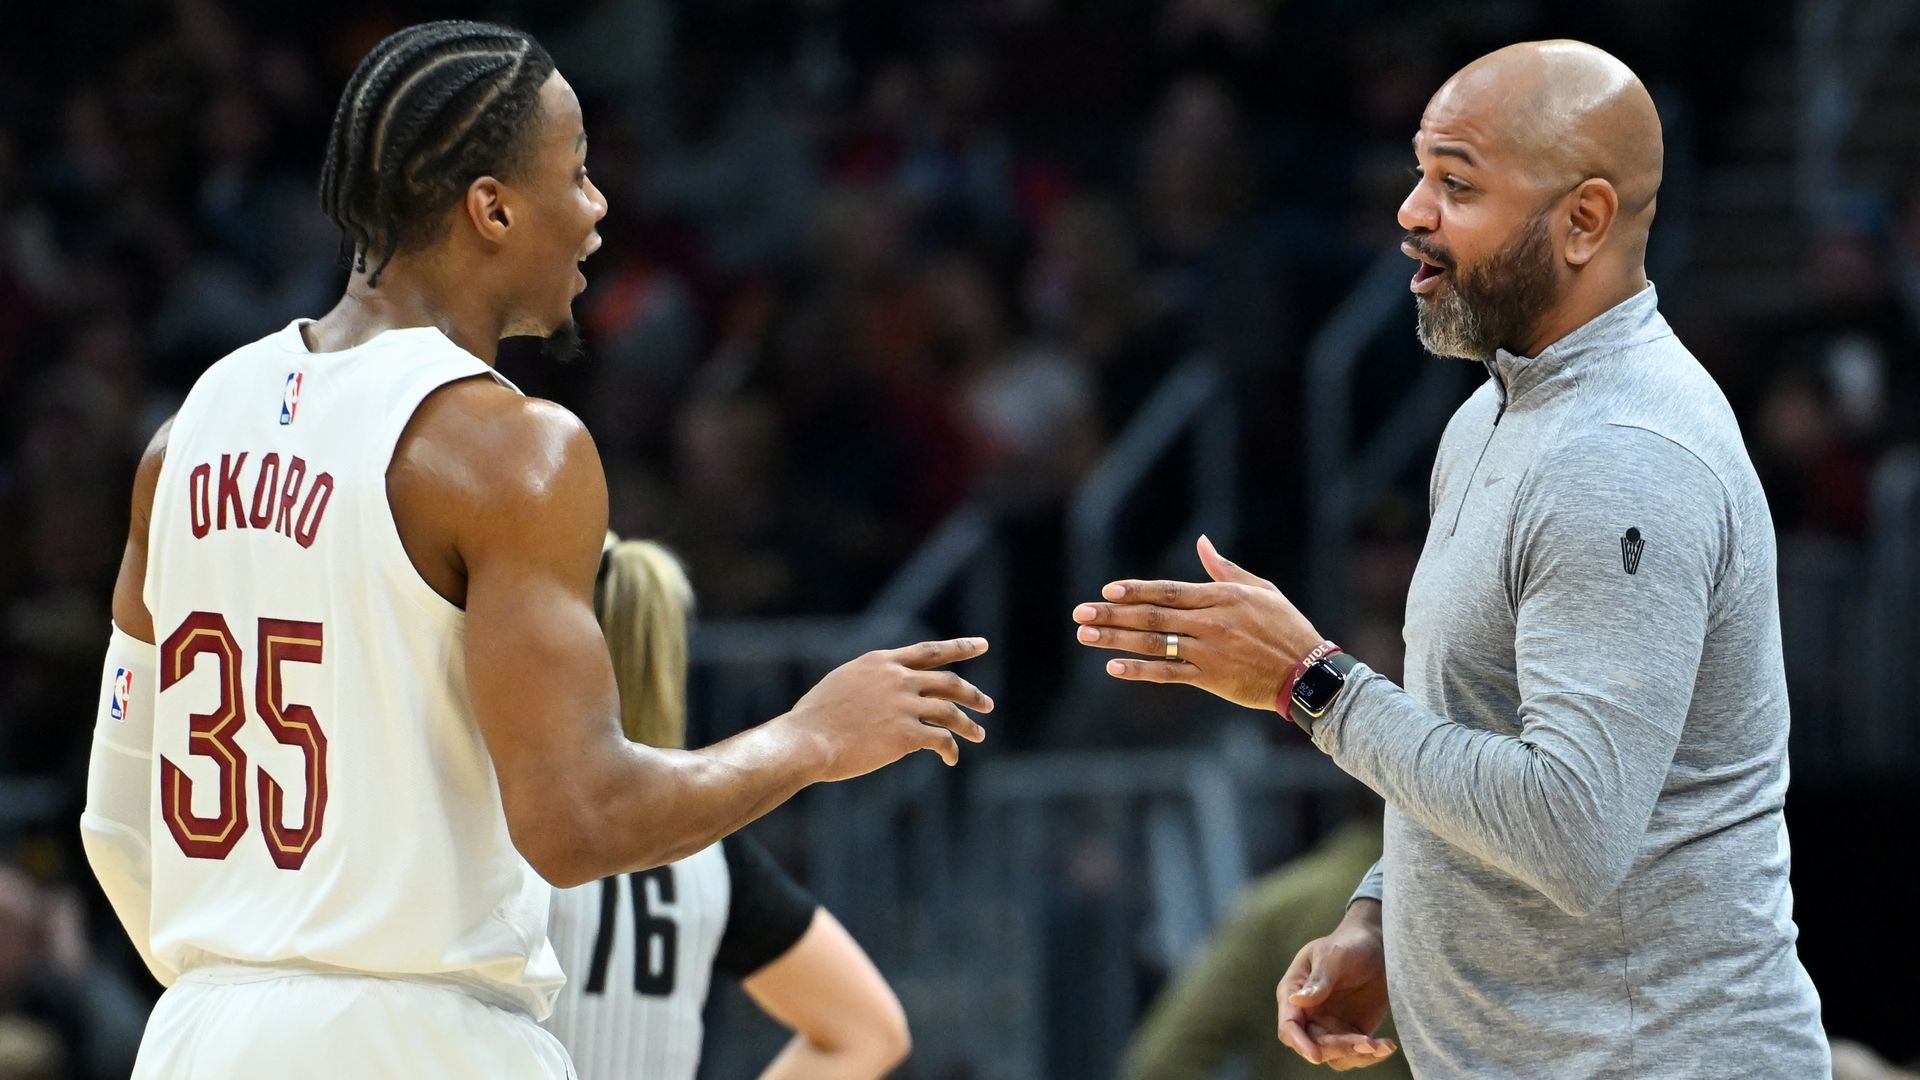 Cavs coach JB Bickerstaff gestures to player Isaac Okoro (in white jersey)